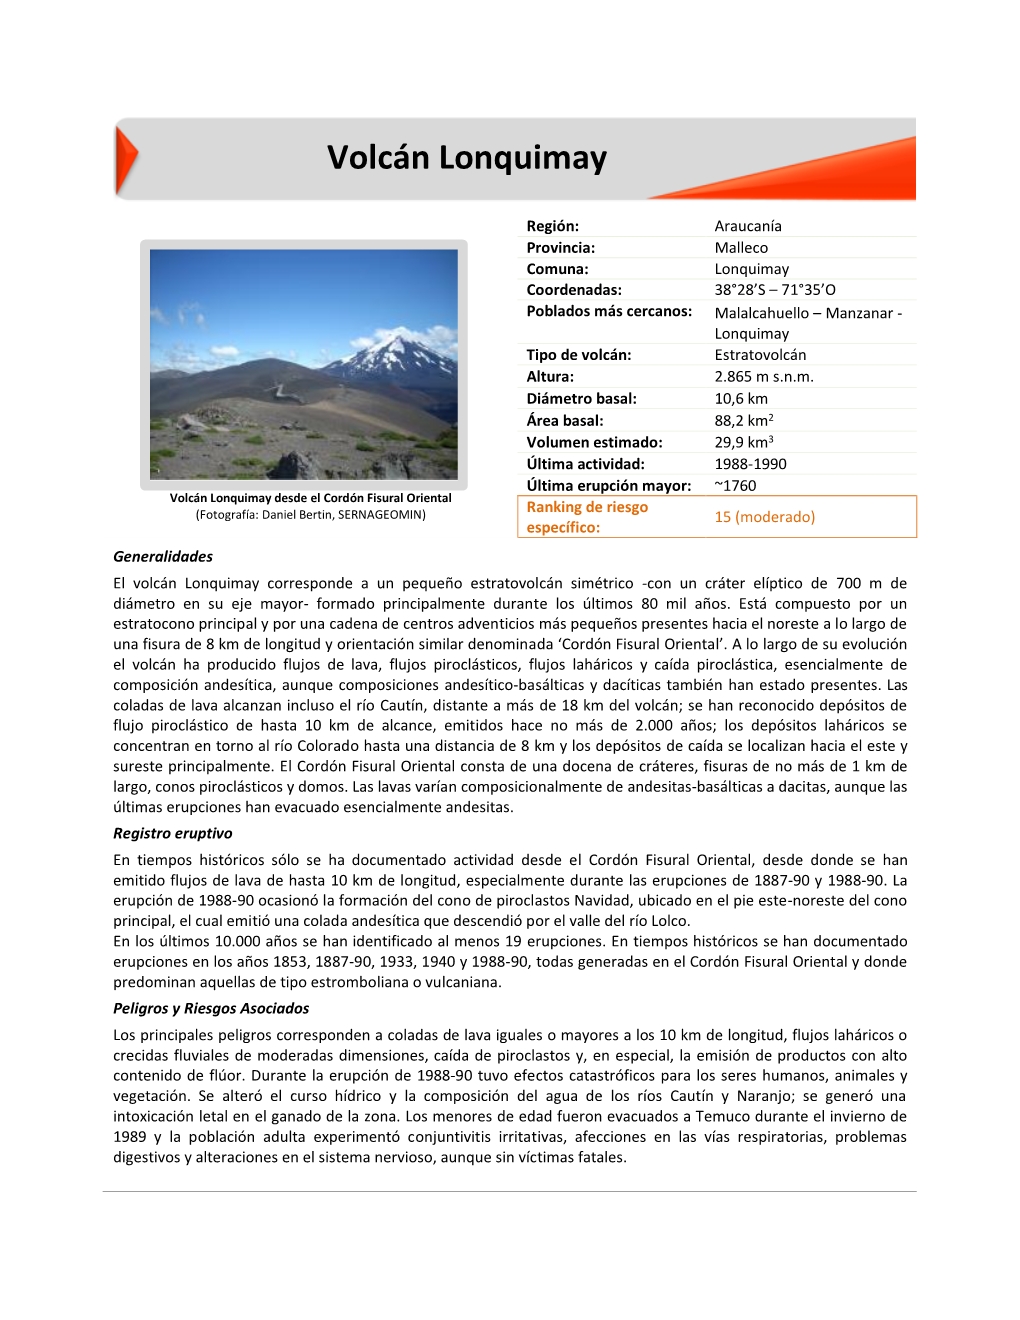 Volcán Lonquimay